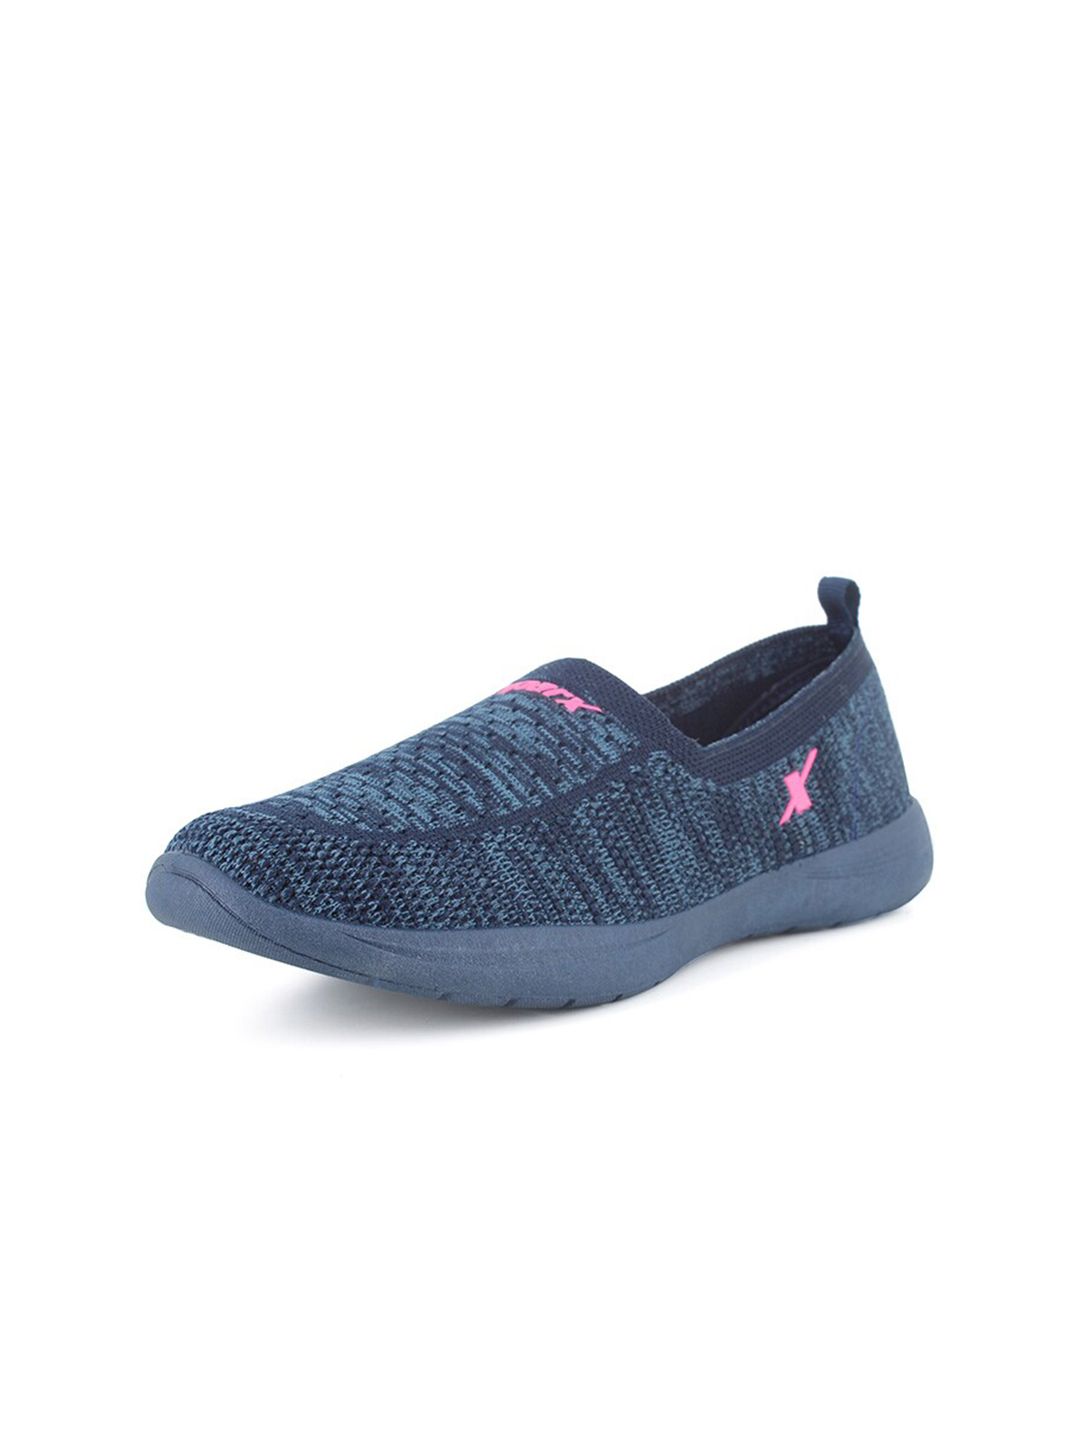 Sparx Women Navy Blue & Pink Textile Walking Non-Marking Shoes Price in India